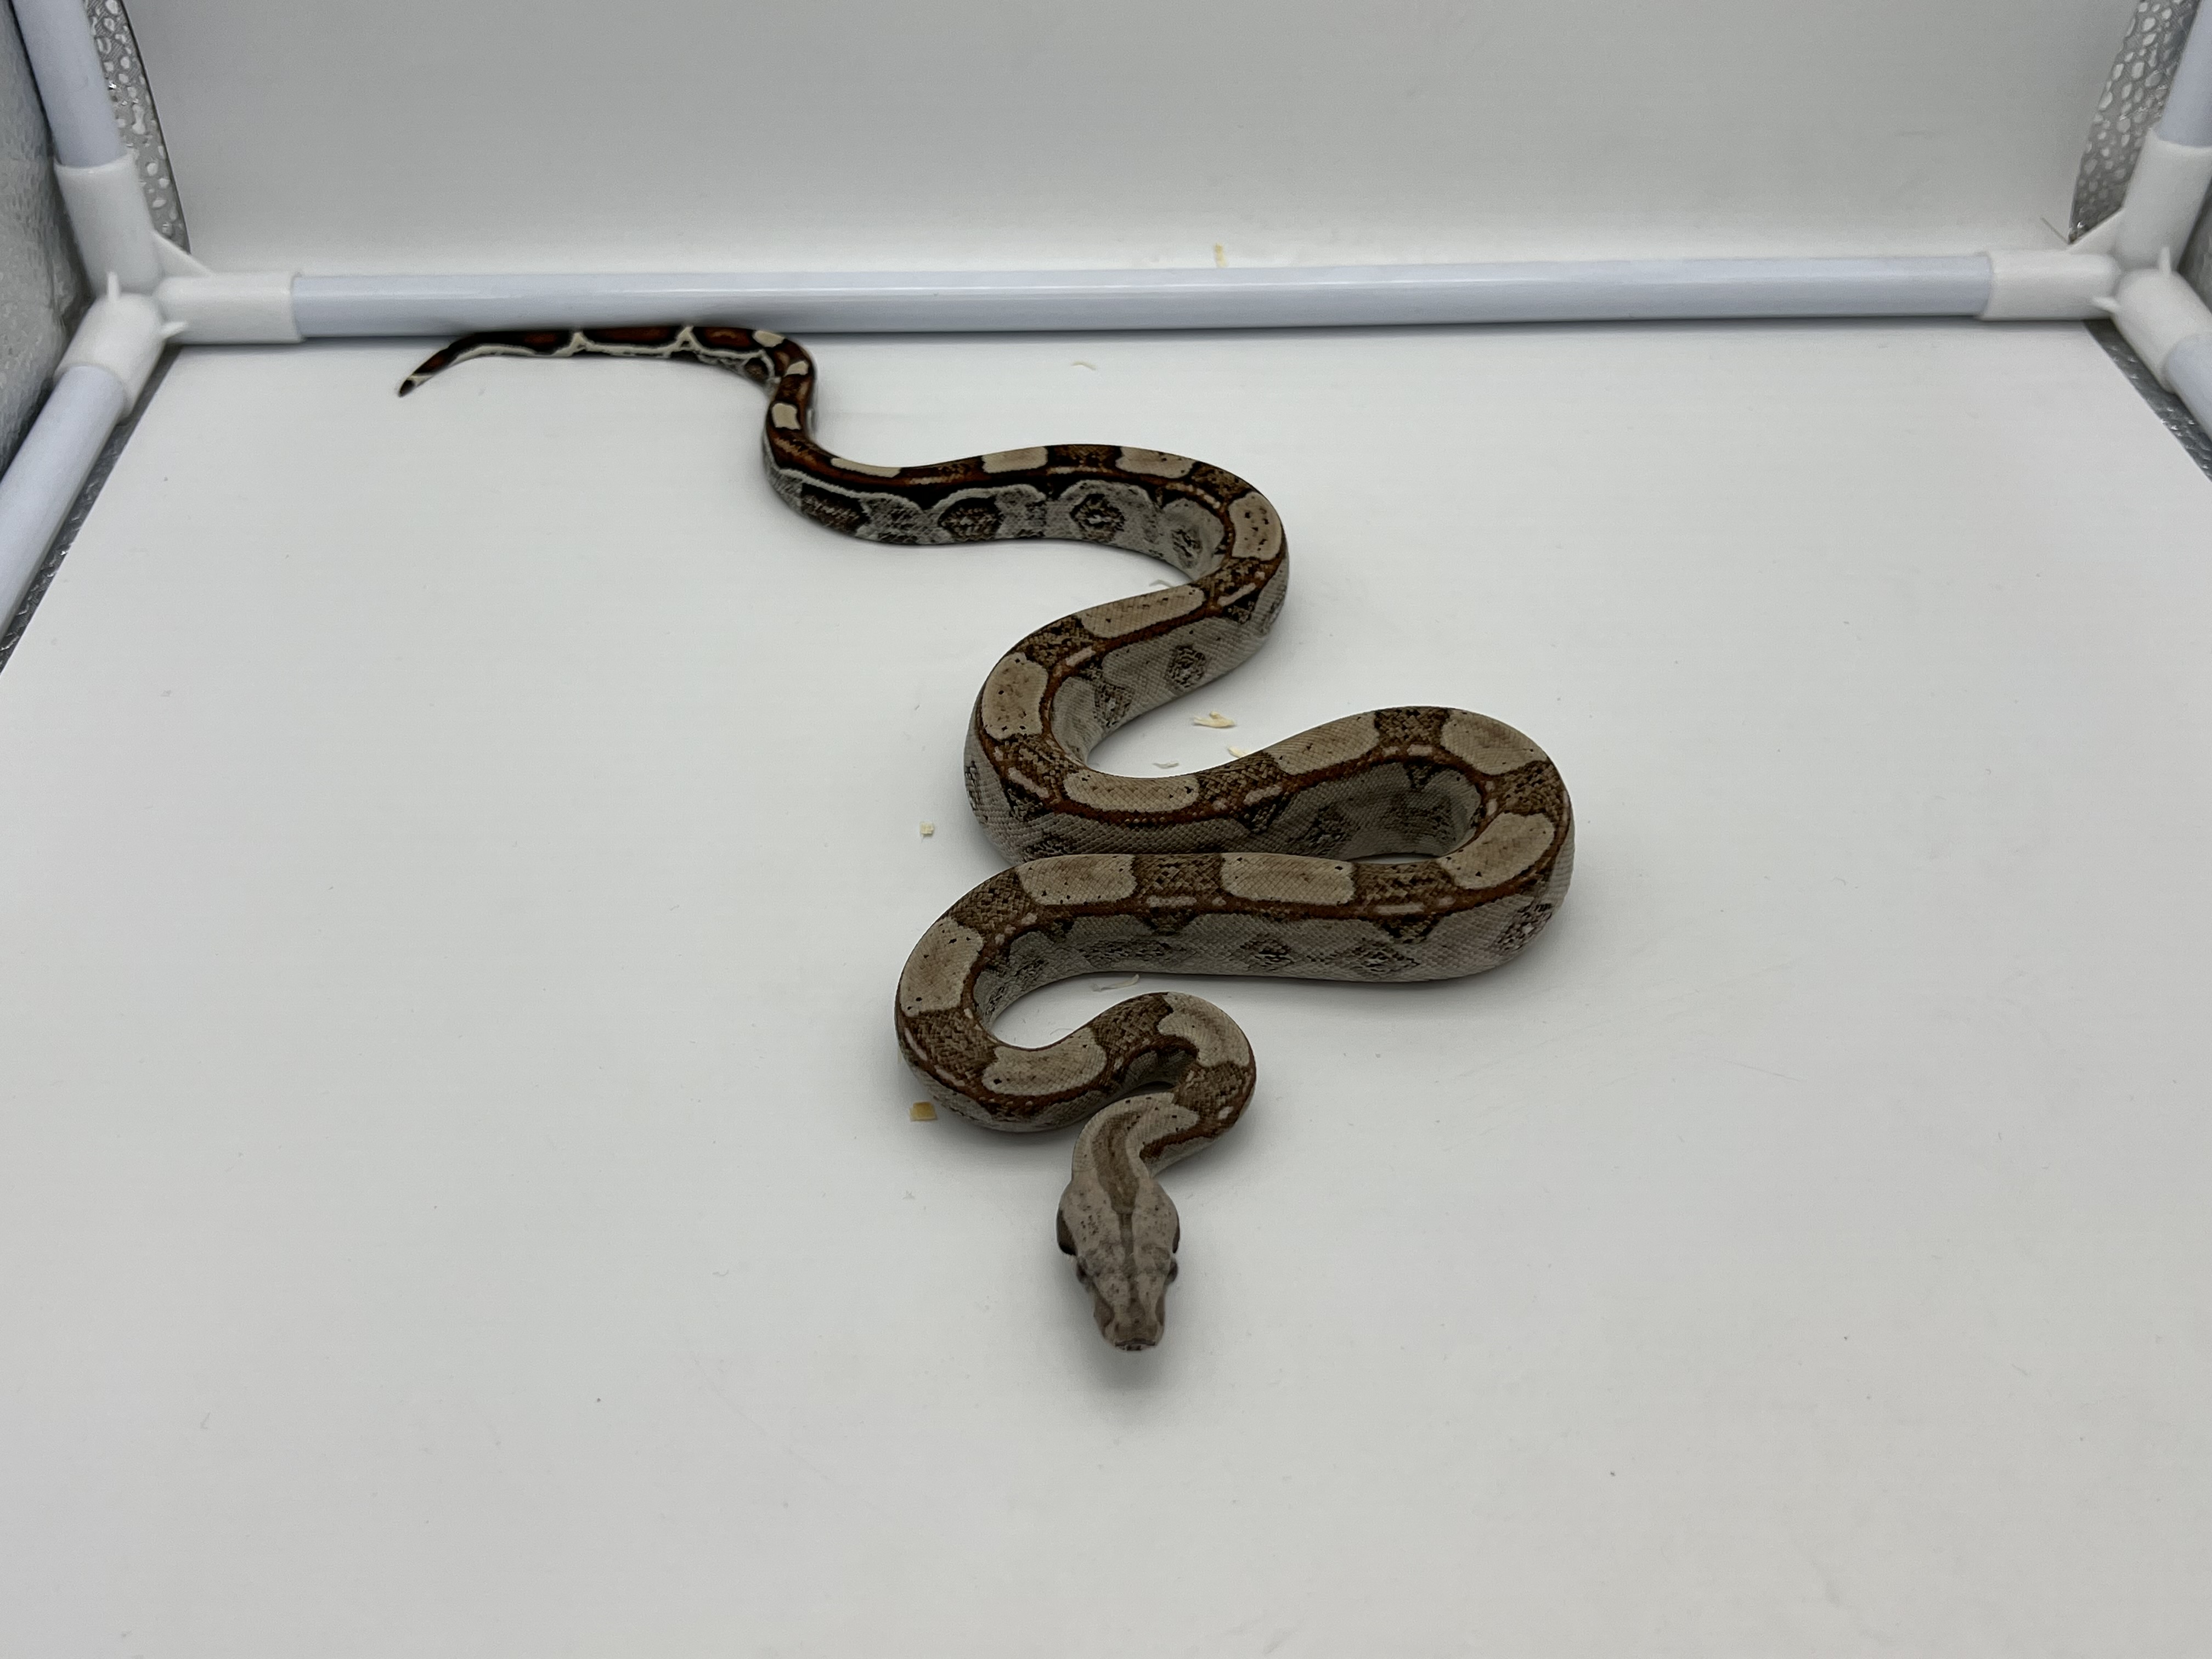 Keywest Boa Constrictor by N D Reptiles UK